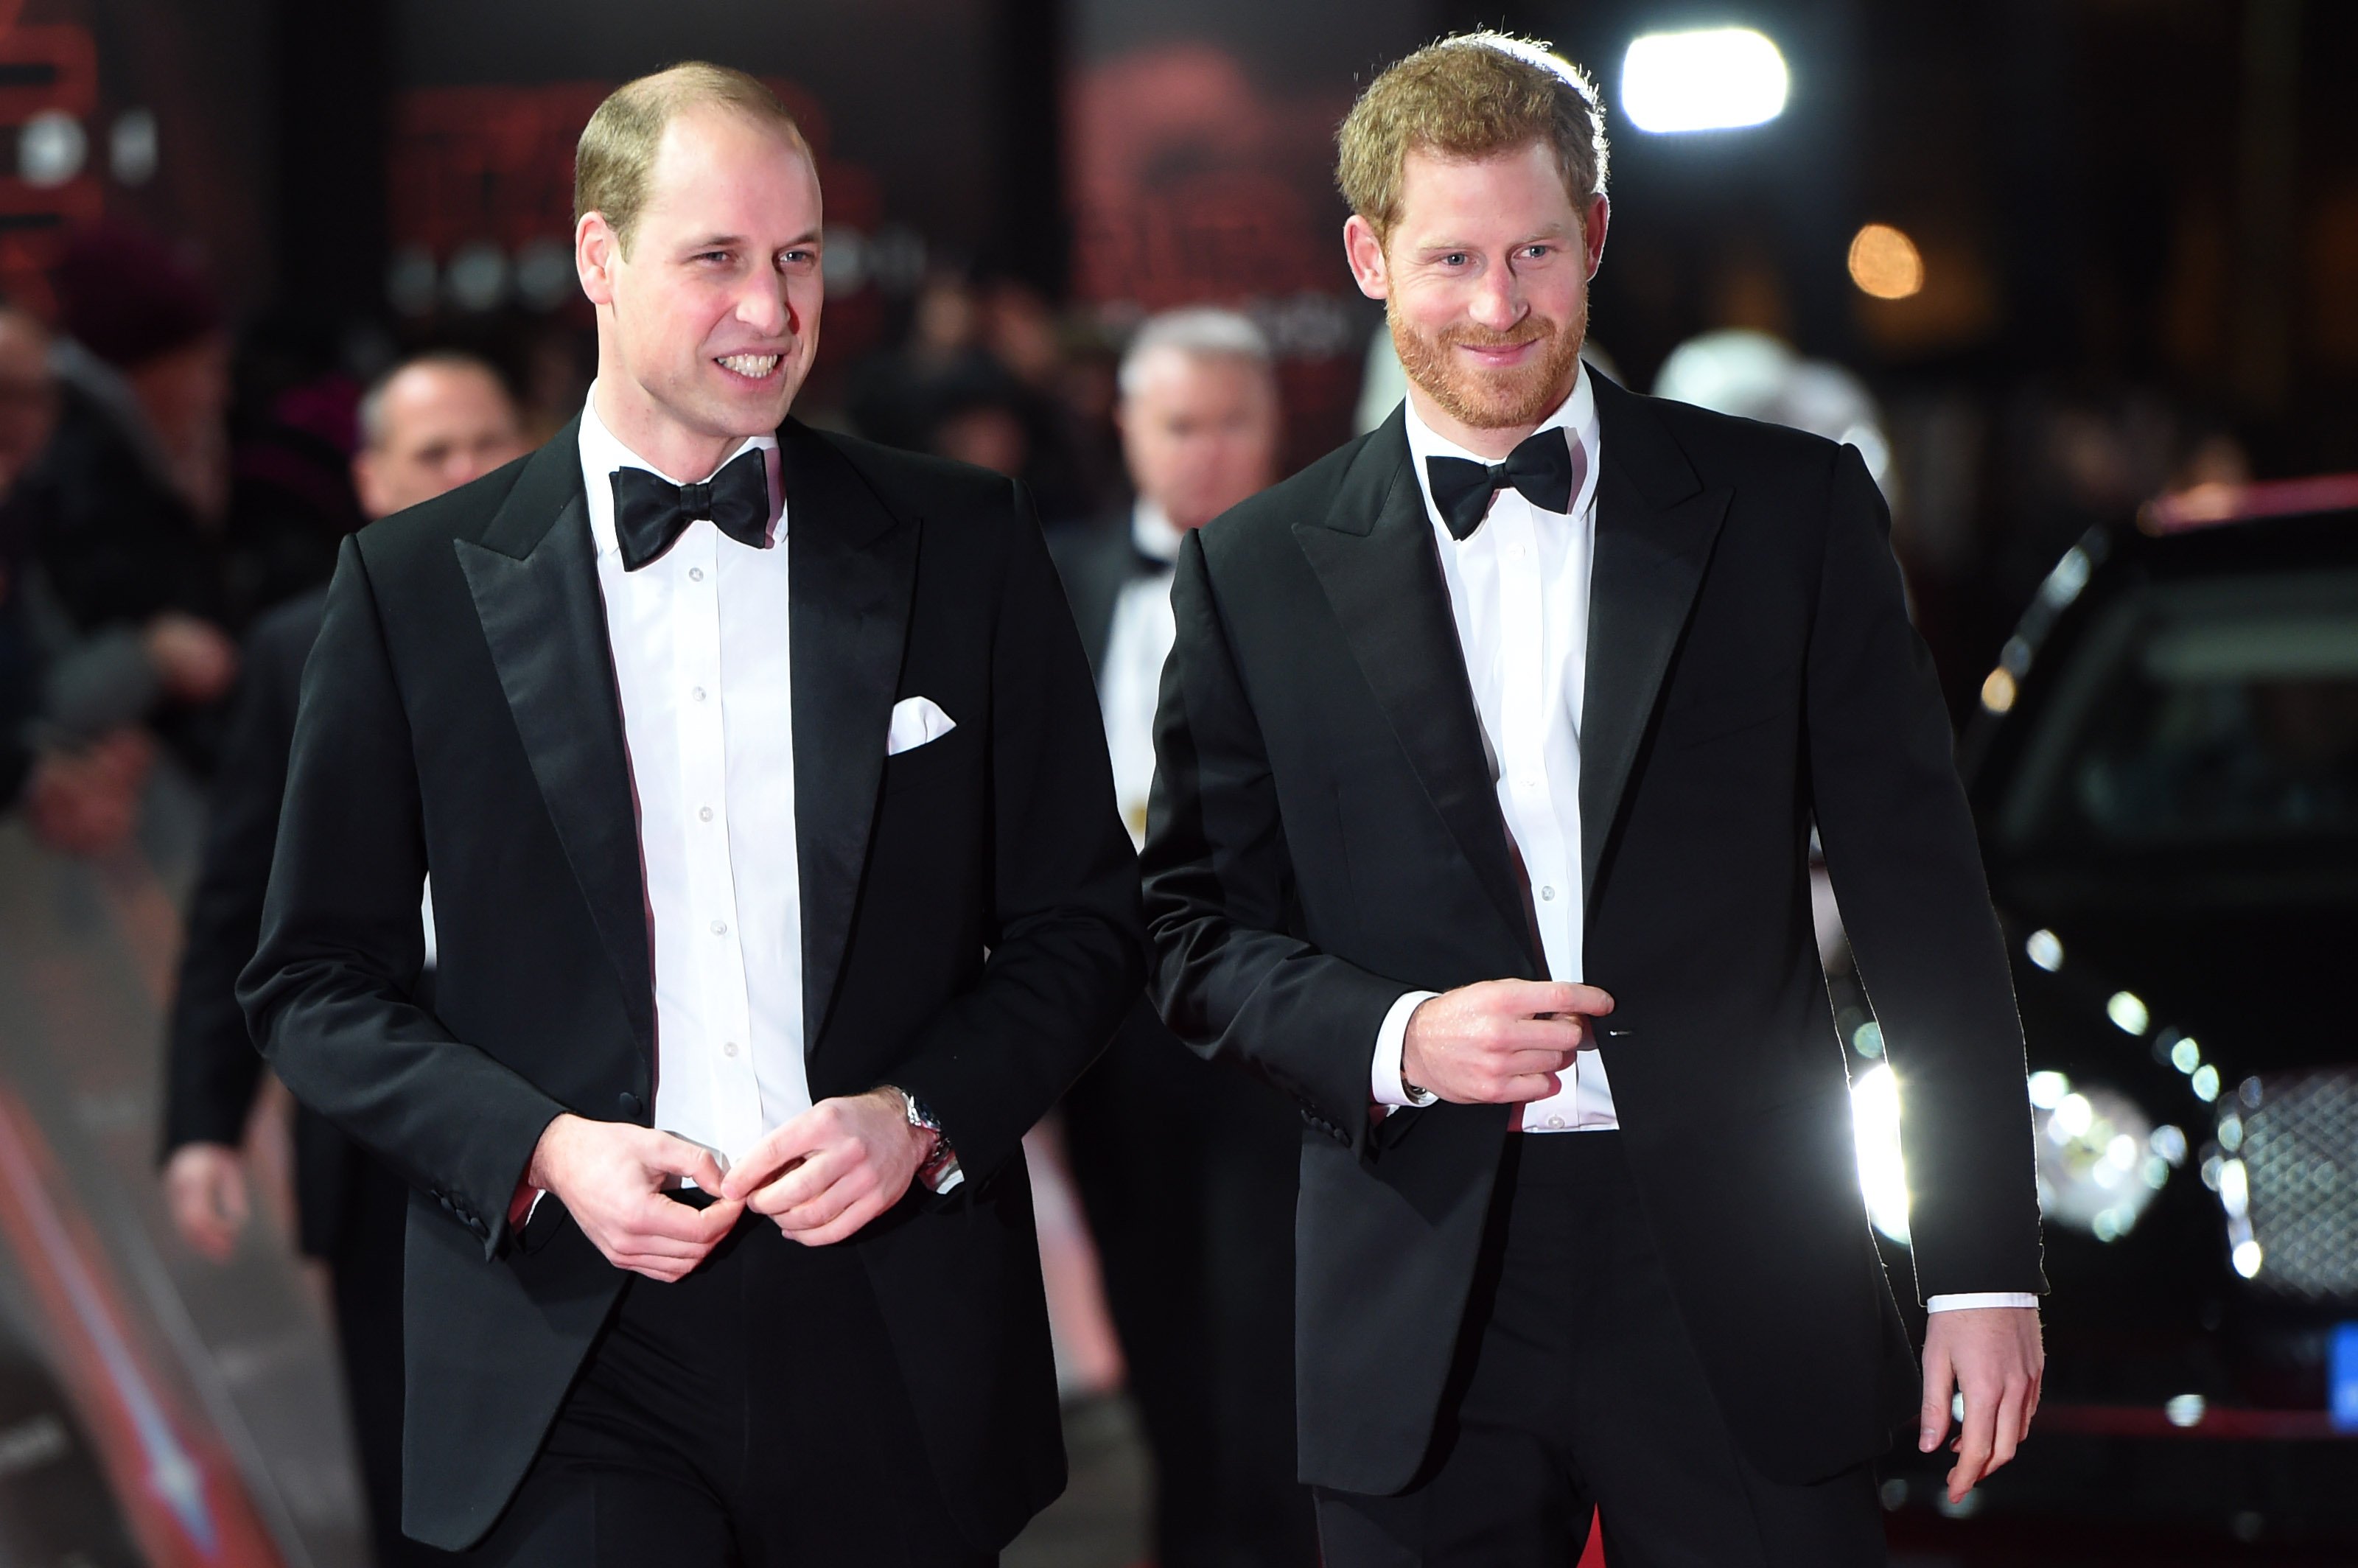 Prince William and Prince harry pictured at the European Premiere of ‘Star Wars: The Last Jedi’ at Royal Albert Hall, 2017, England. | Photo: Getty Images